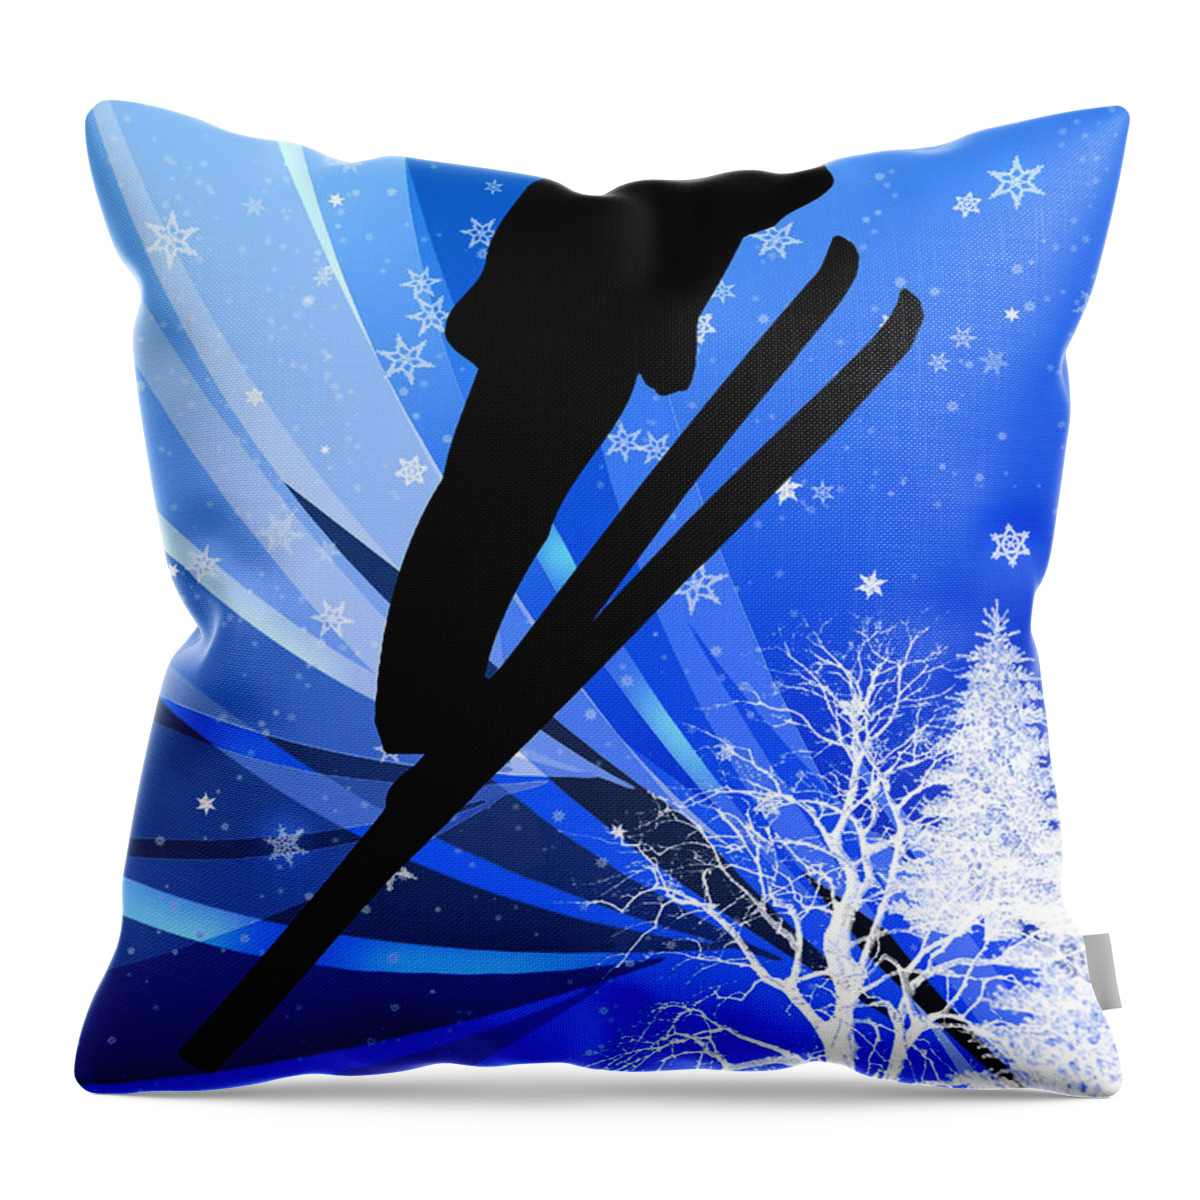 Ski Throw Pillow featuring the painting Ski Jumping in the Snow by Elaine Plesser